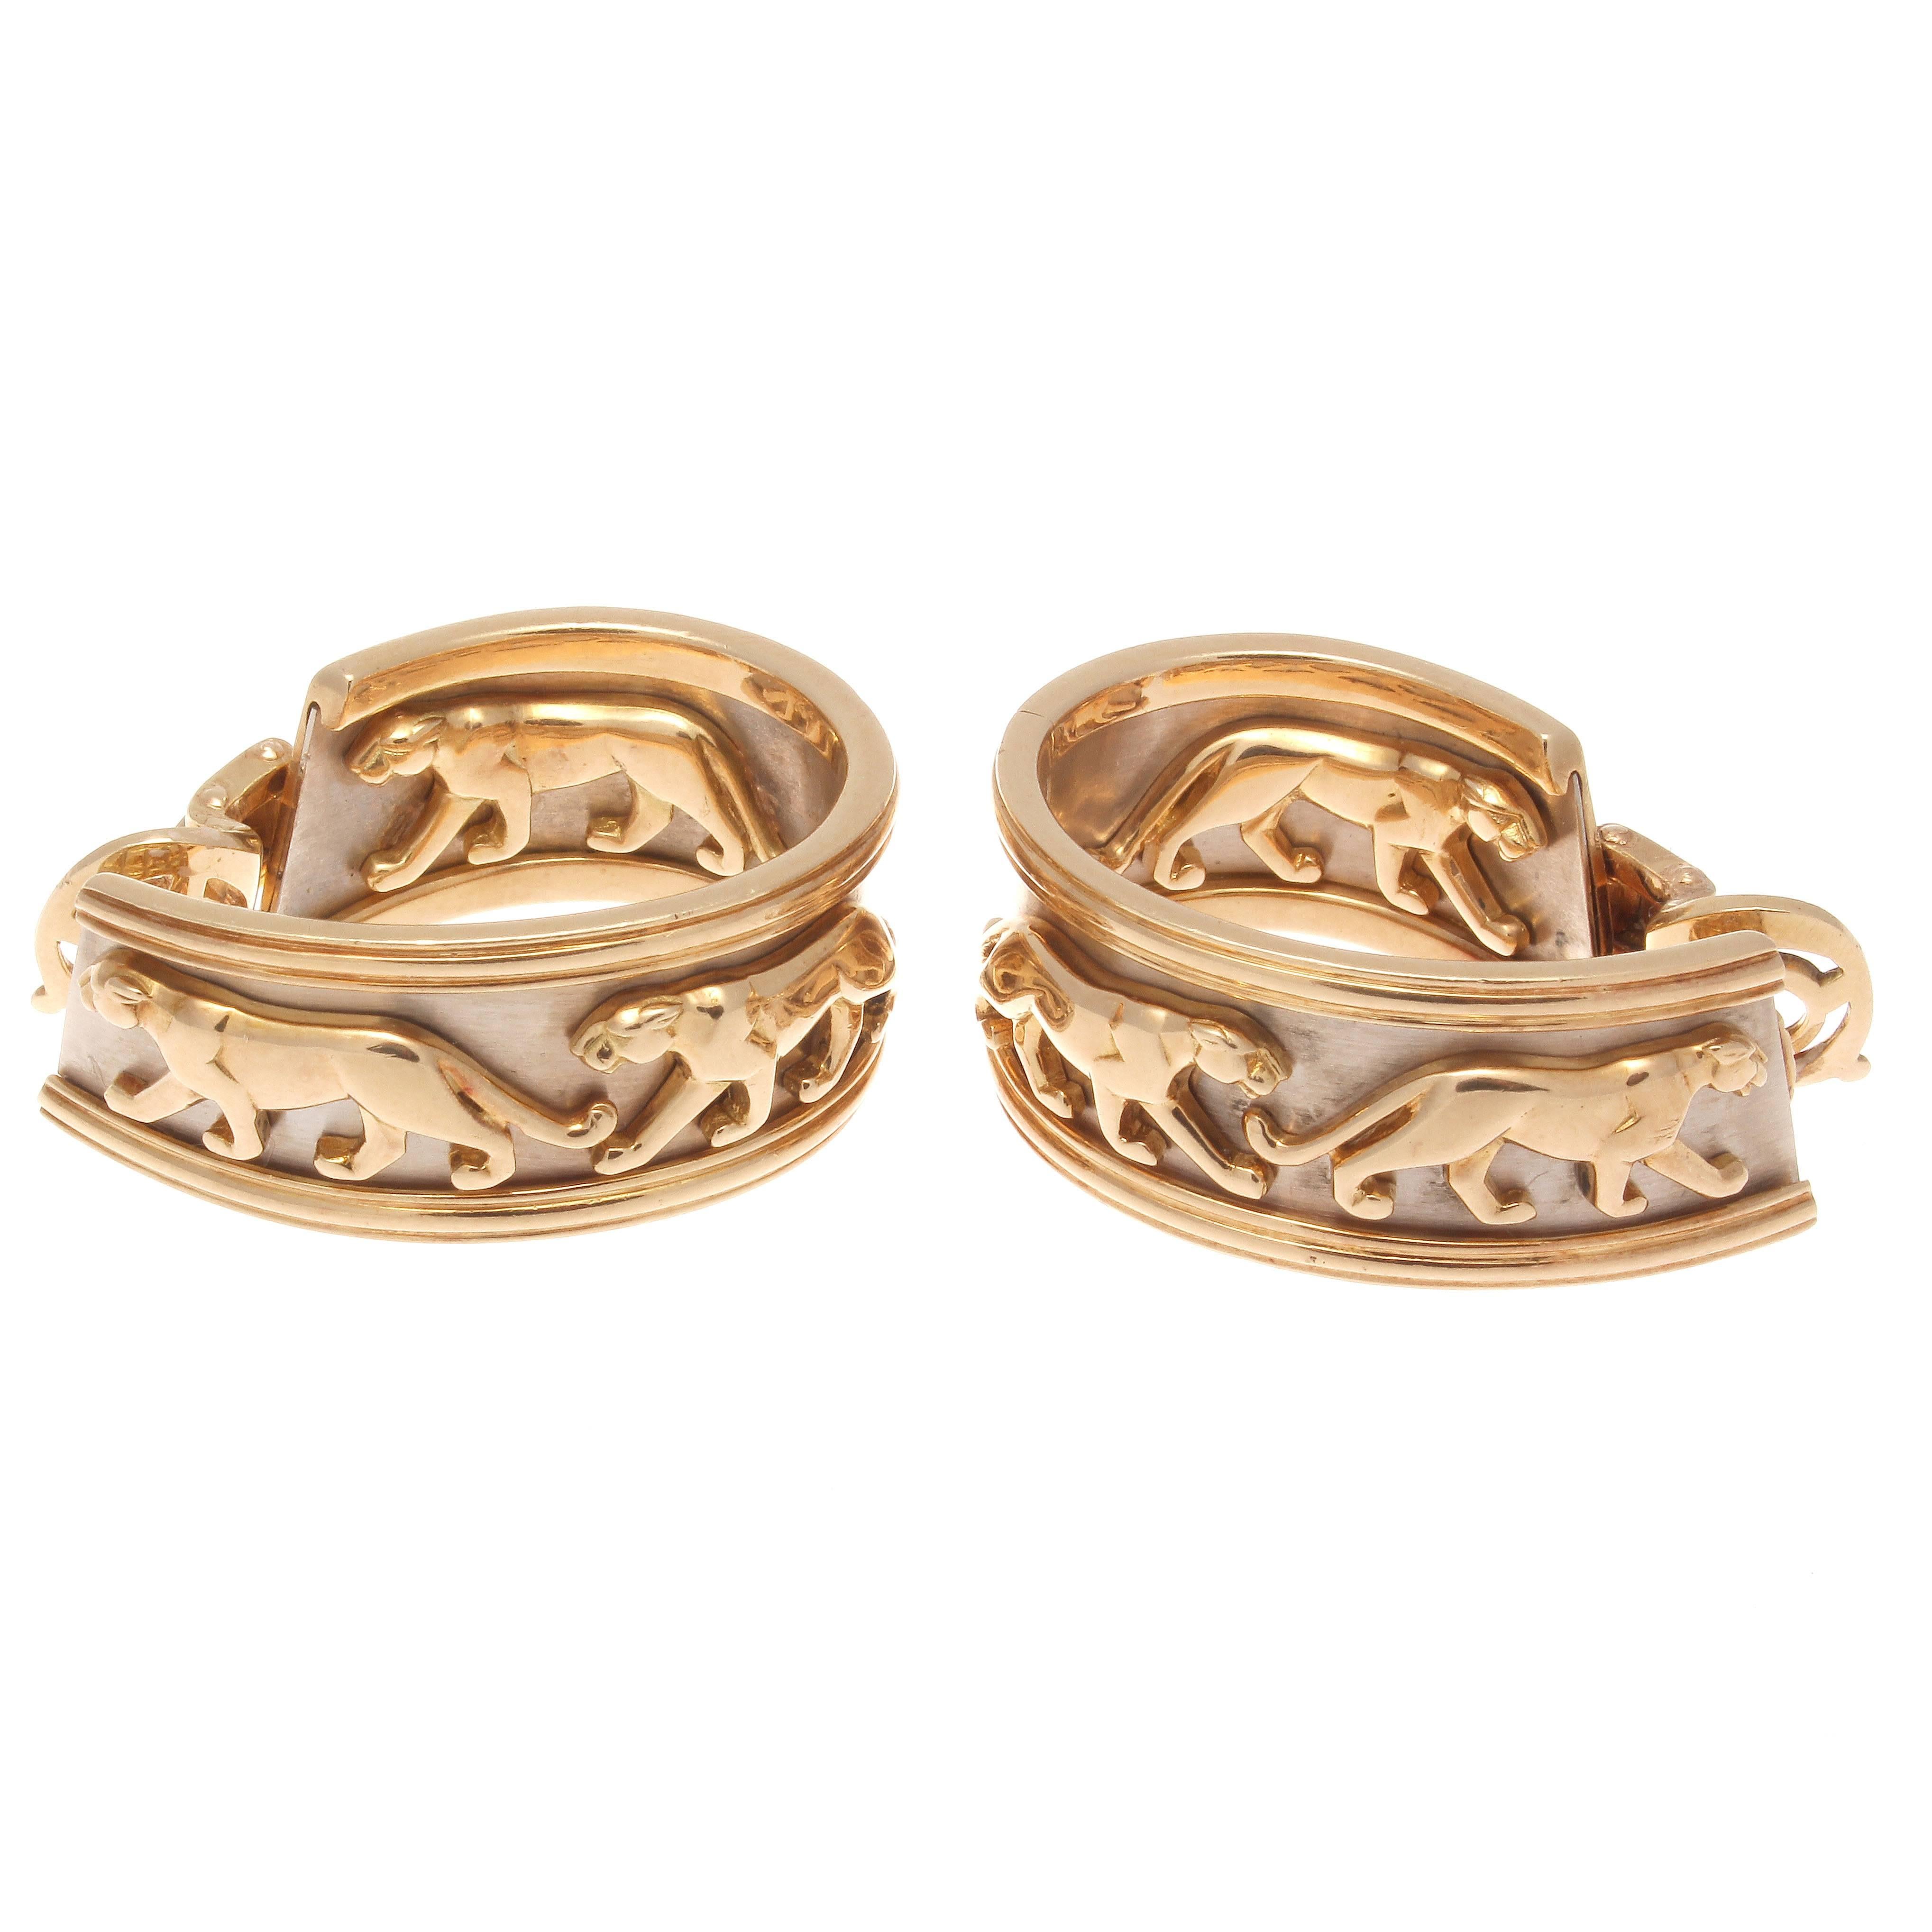 Cartier Panthere Gold Earrings